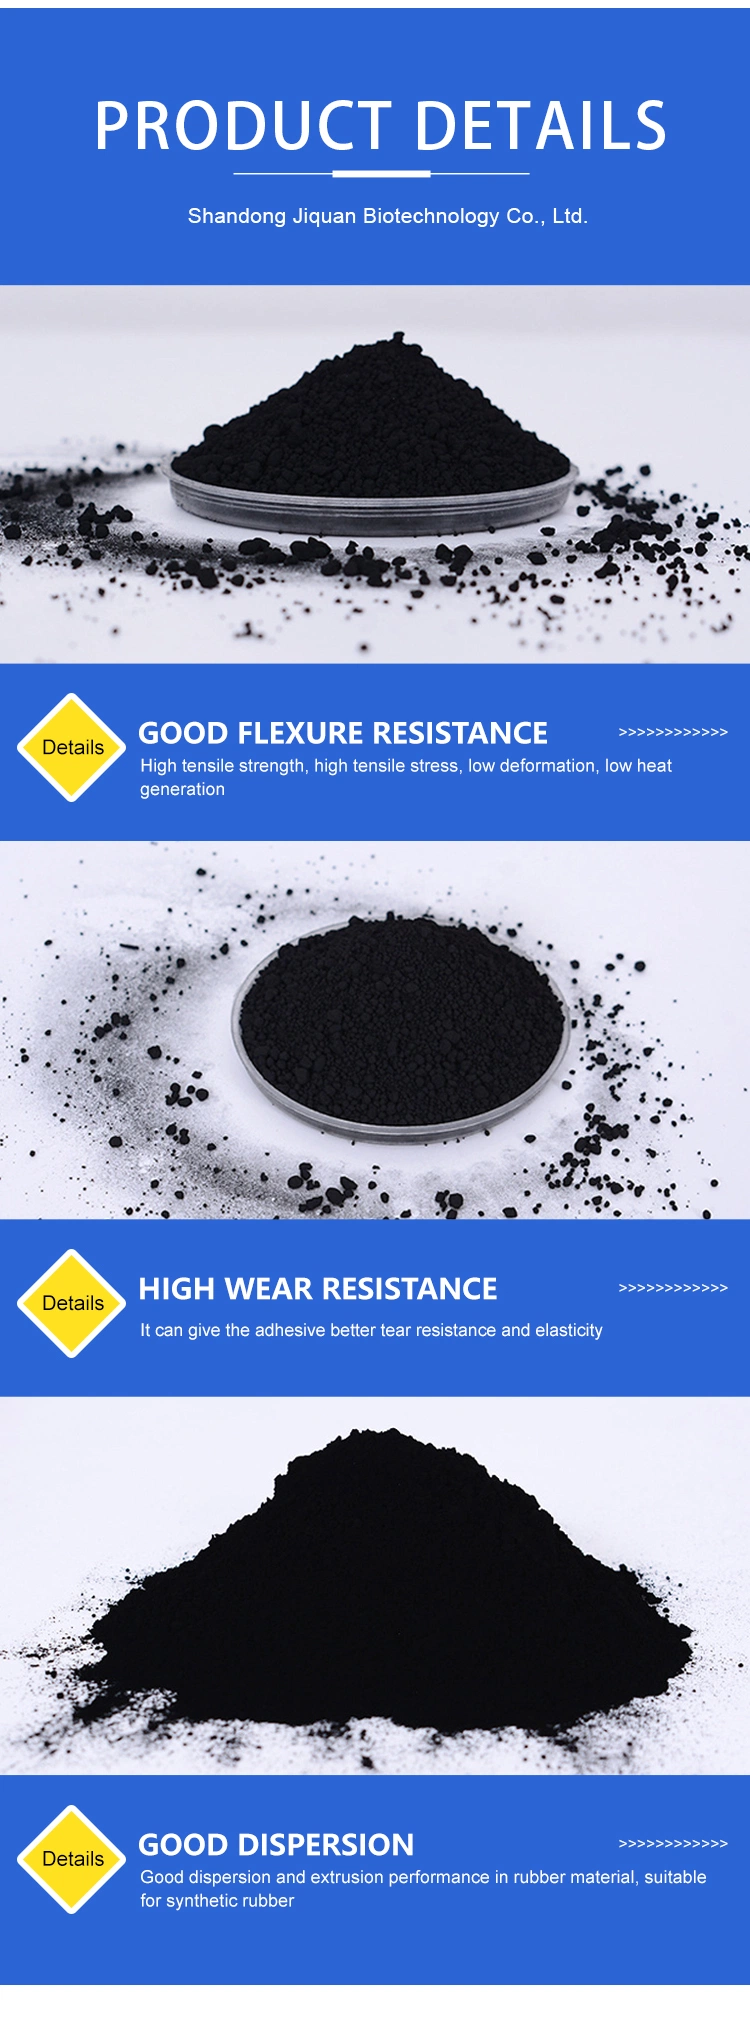 Manufacturers Supply Rubber Grade N330 Pyrolysis to Recover Tire Crack Carbon Black.